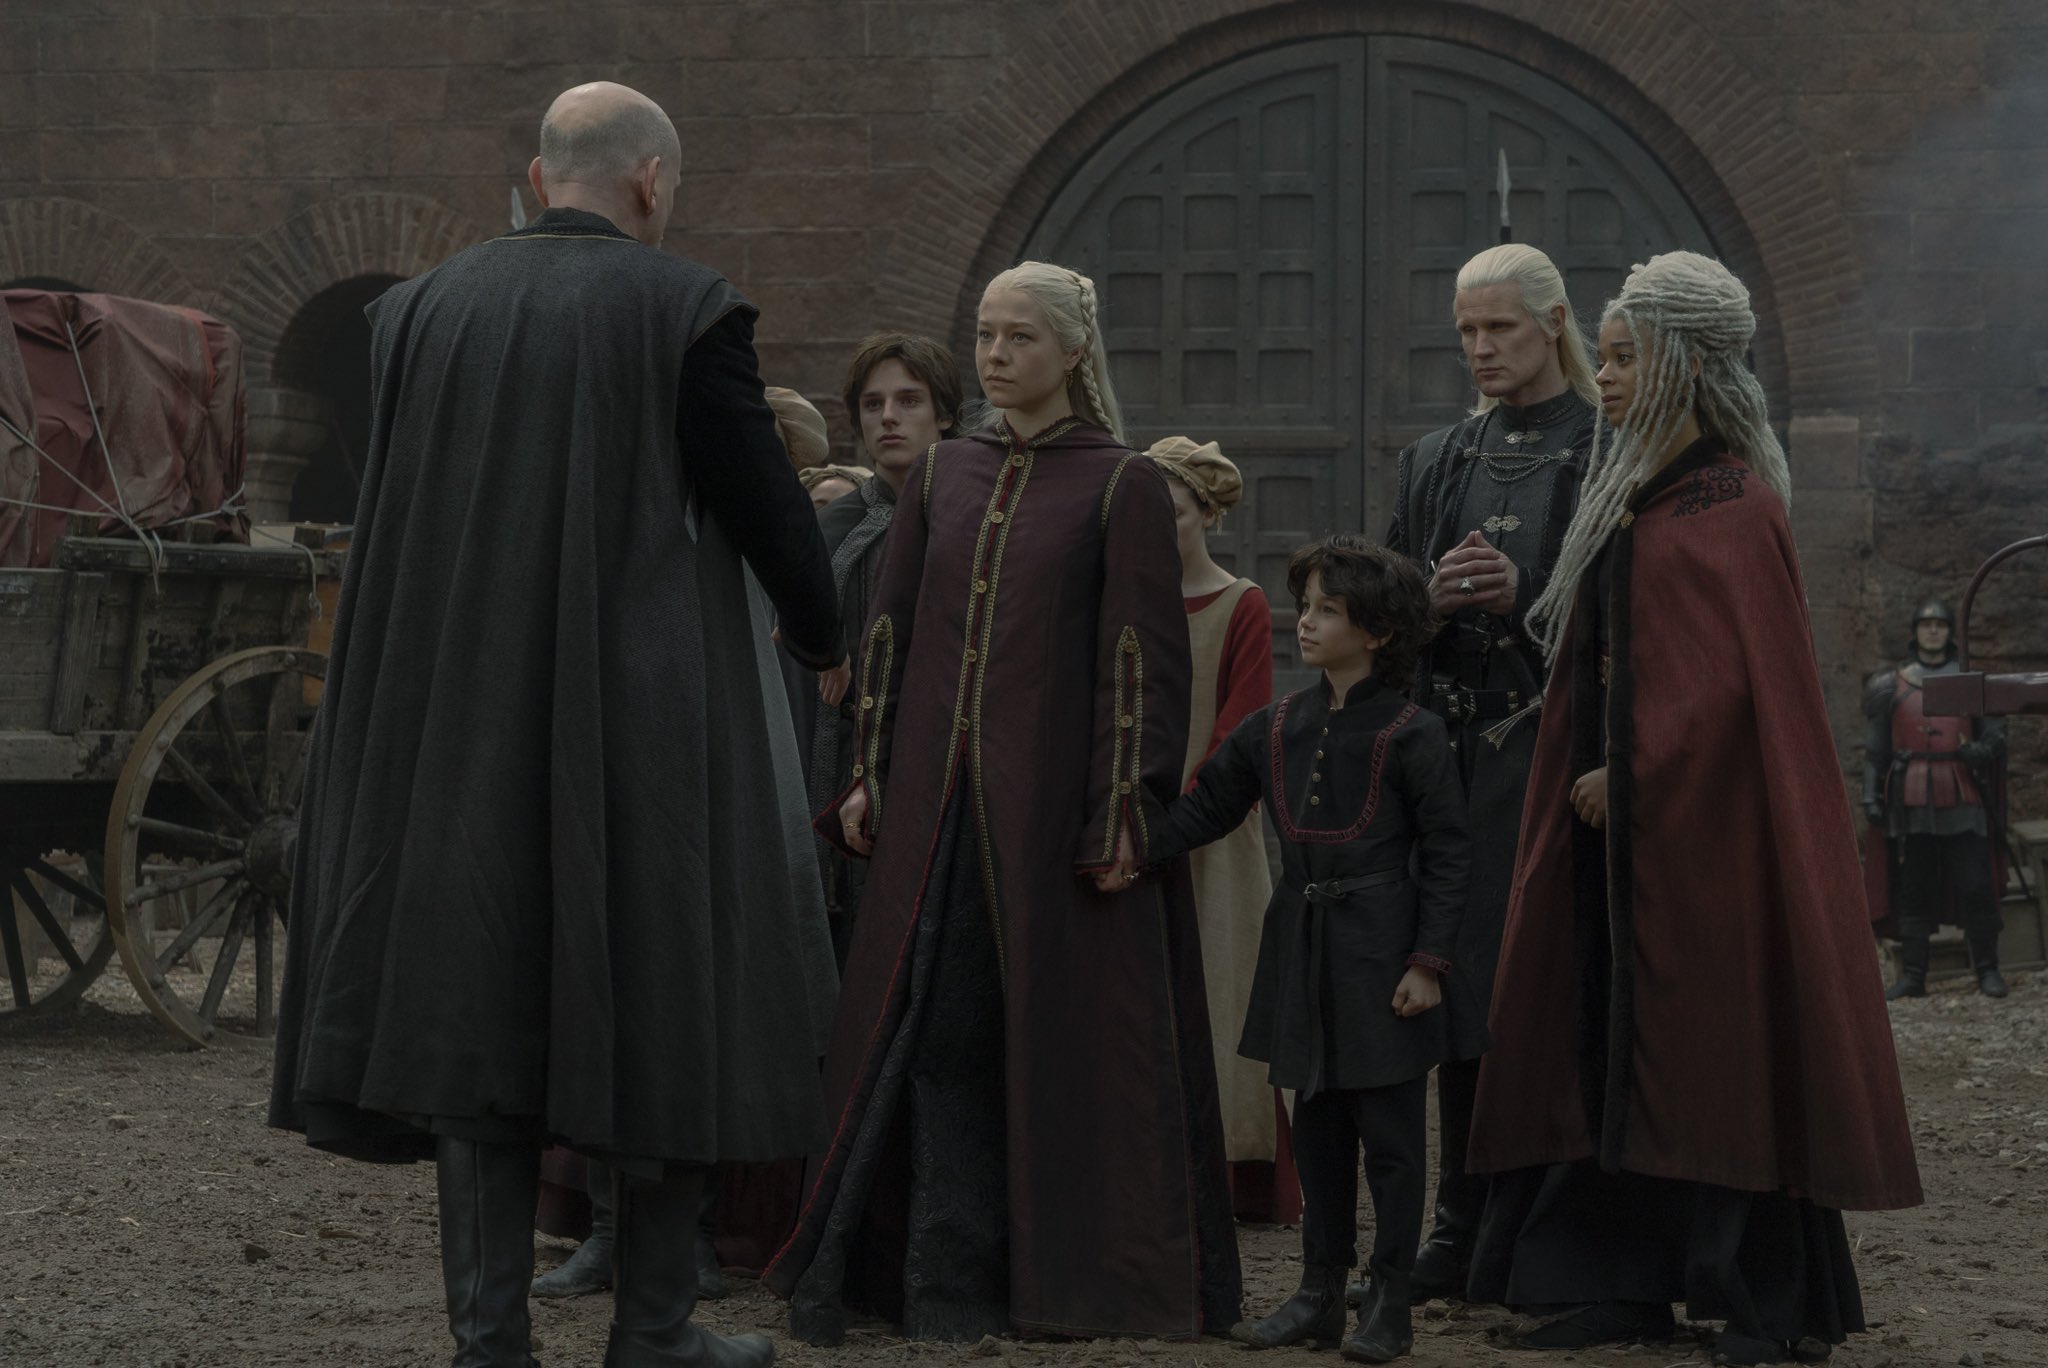 rhaenyra-daemon-and-their-children-arriving-at-the-red-keep-house-of-the-dragon-episode-8